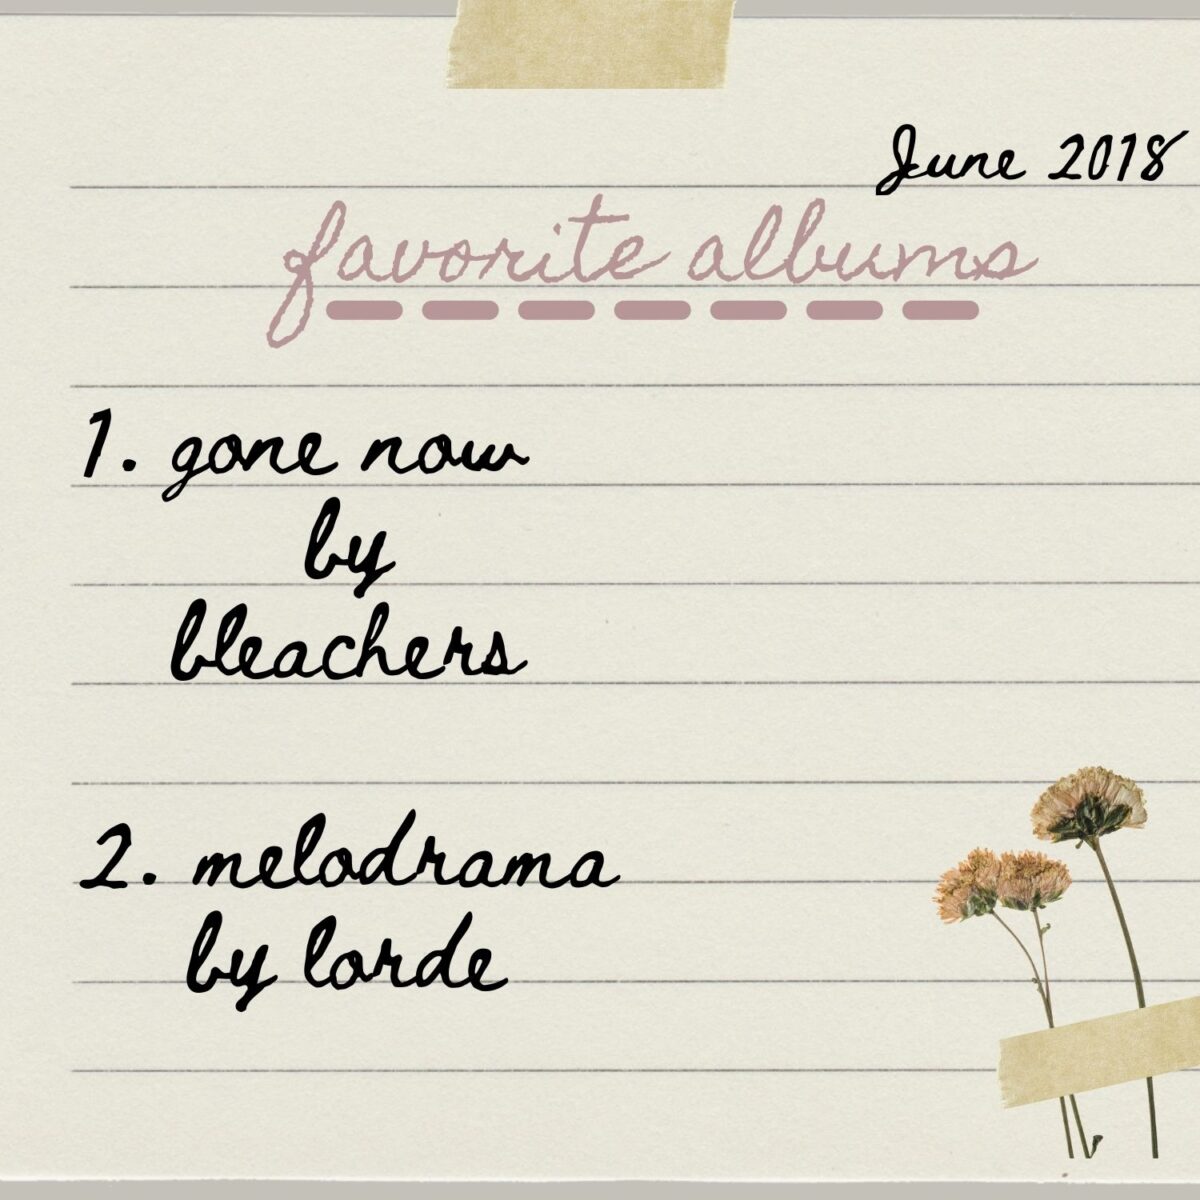 Favorite Albums, dated June 2018, 1. gone now by bleachers 2. melodrama by lorde